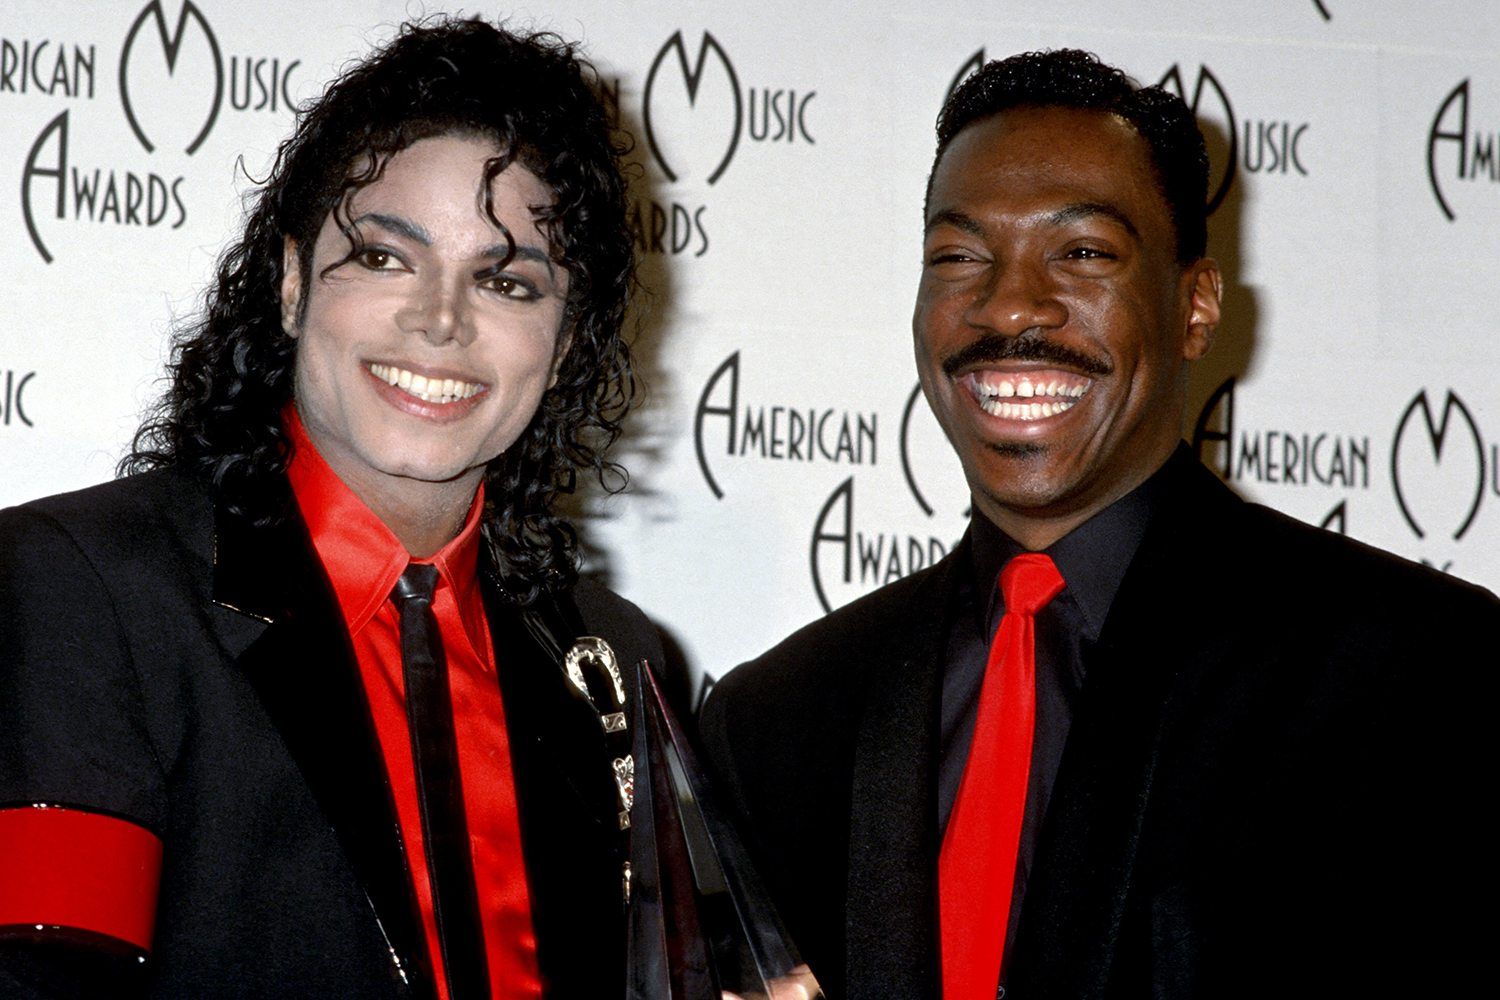 Michael Jackson and Eddie Murphy in the press room